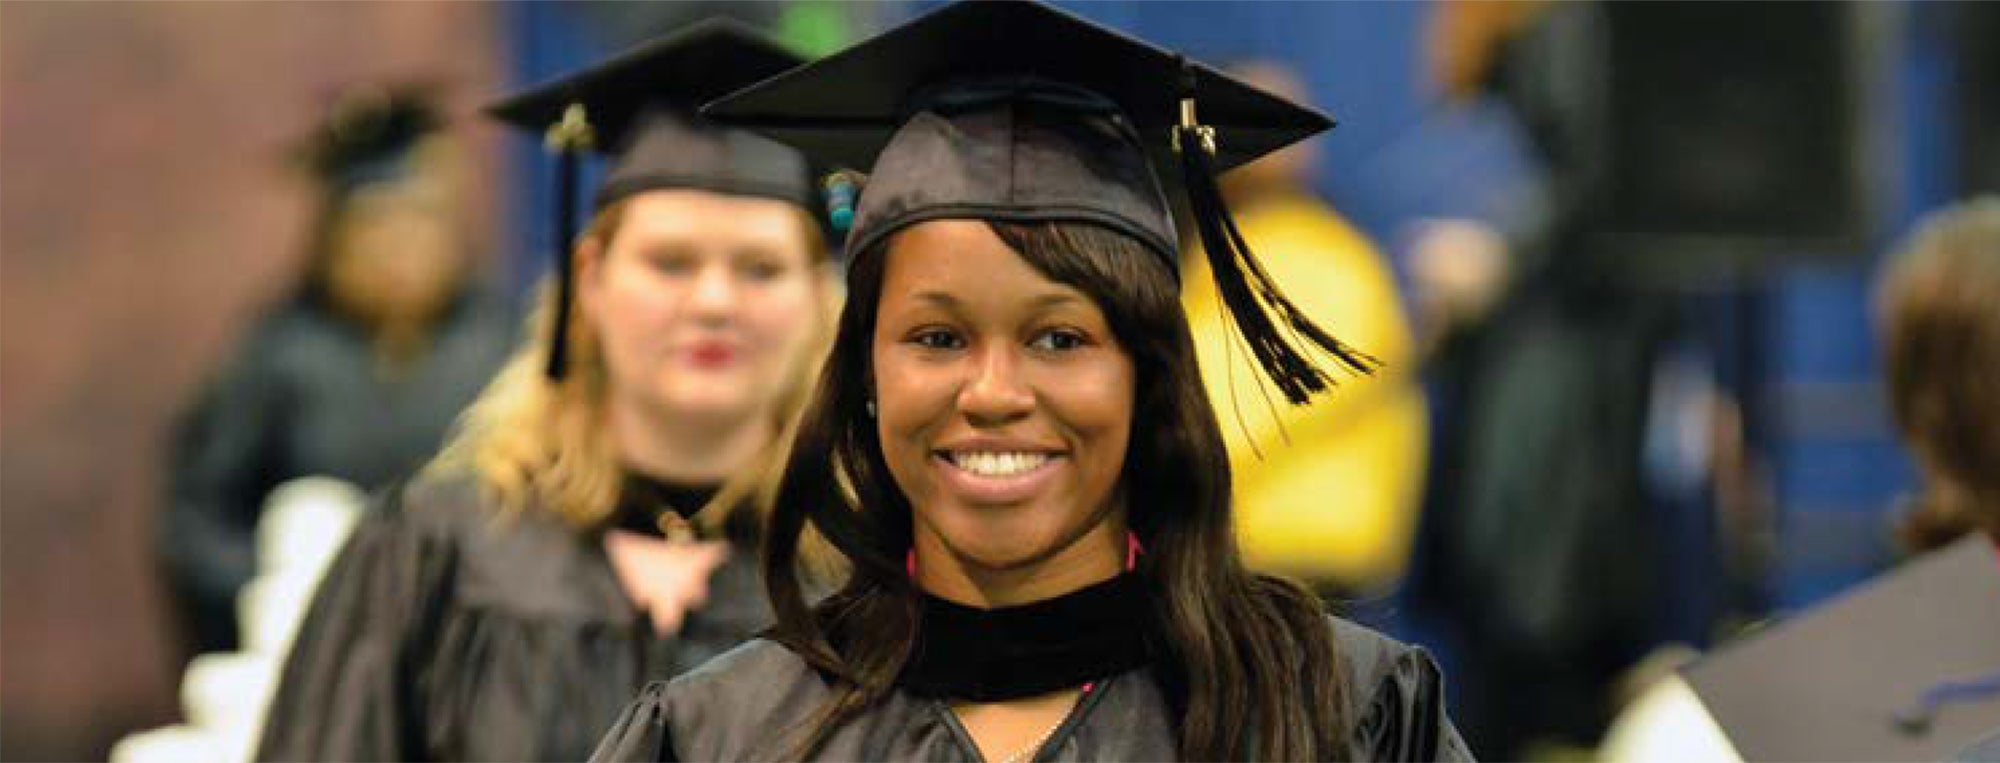 Image of student in graduation cap and gown